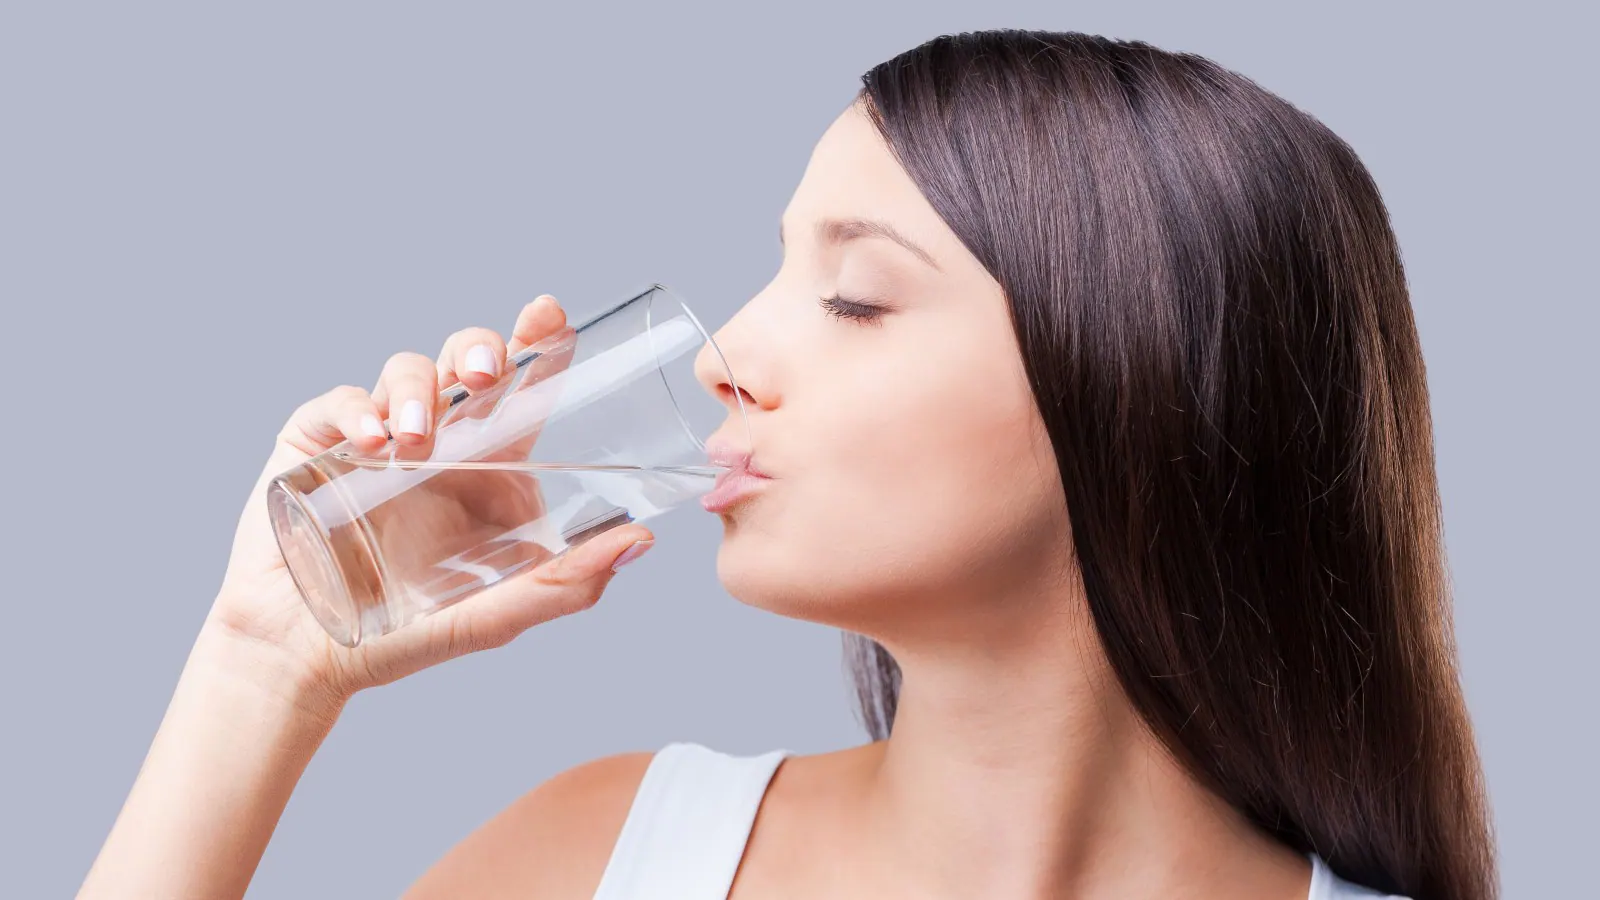 Woman In Fitness Pose Holding Water Bottle Stock Photo - Download Image Now  - Adult, Adults Only, Beautiful People - iStock